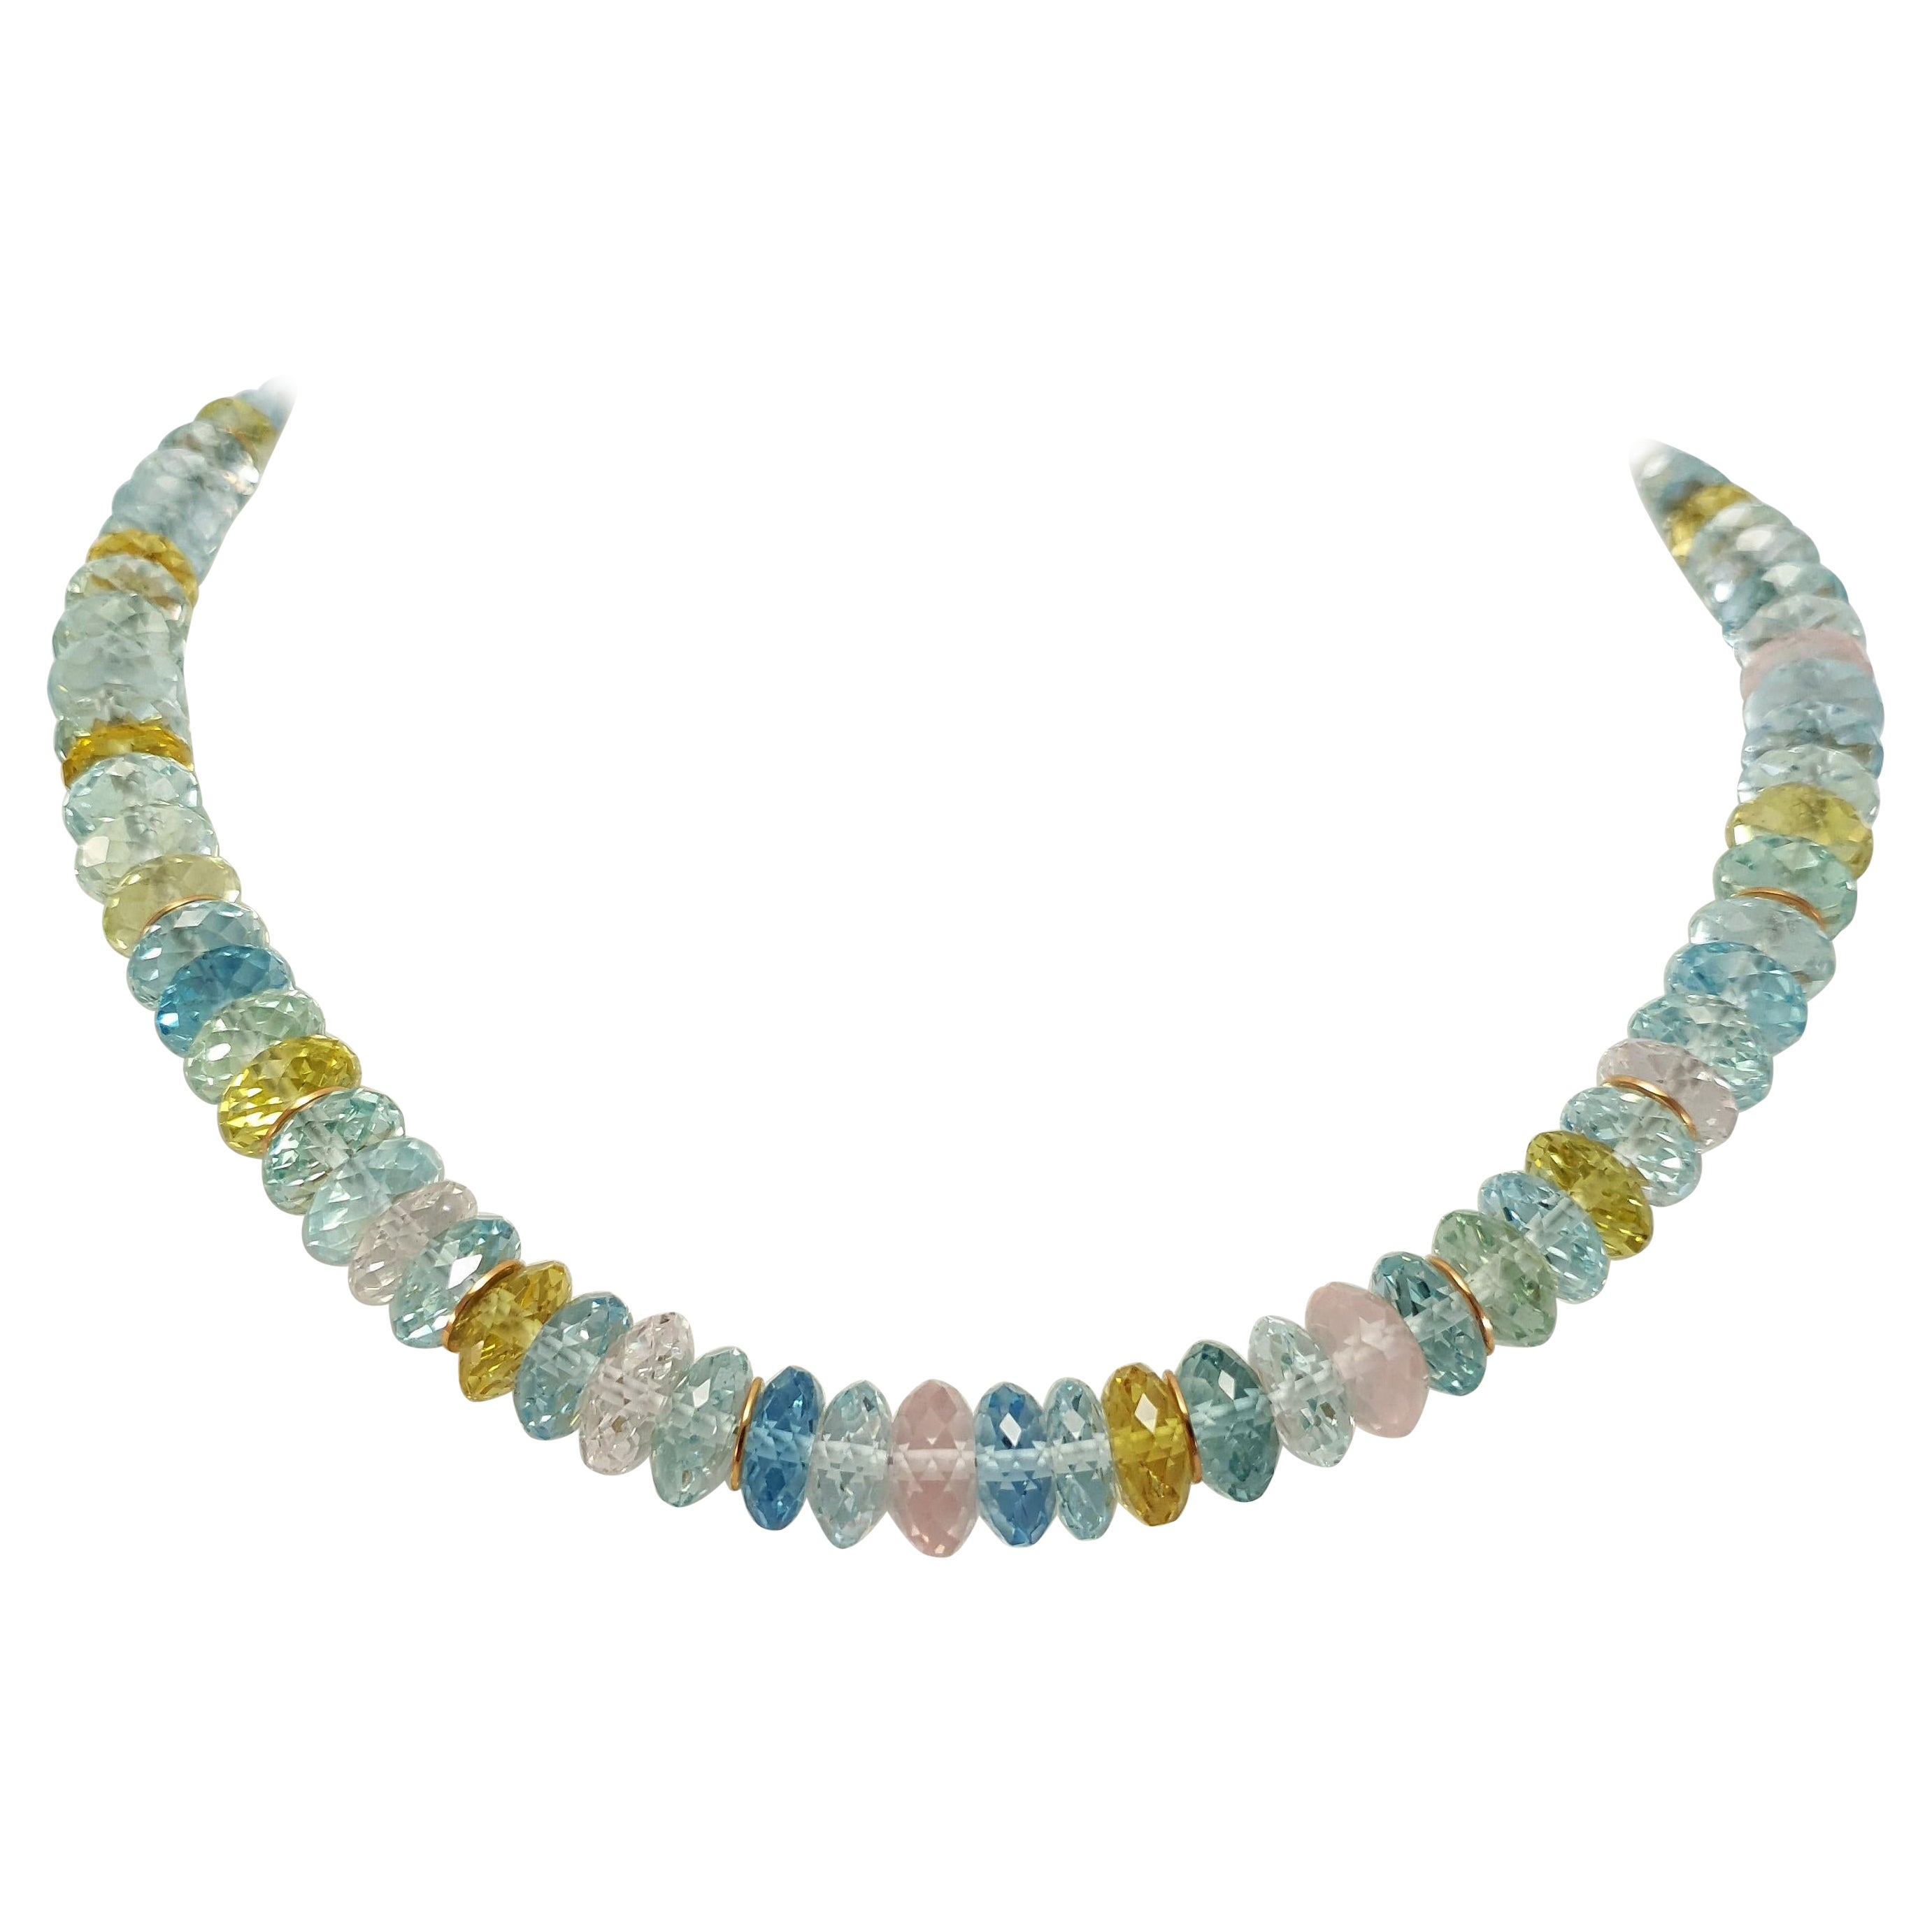 This Natural Faceted Multicolour Beryl Rondel Beaded Necklace with 18 Carat Rose Gold is totally handmade. Cutting as well as goldwork are made in German quality. The screw clasp is easy to handle and very secure. 
Timeless and classic design